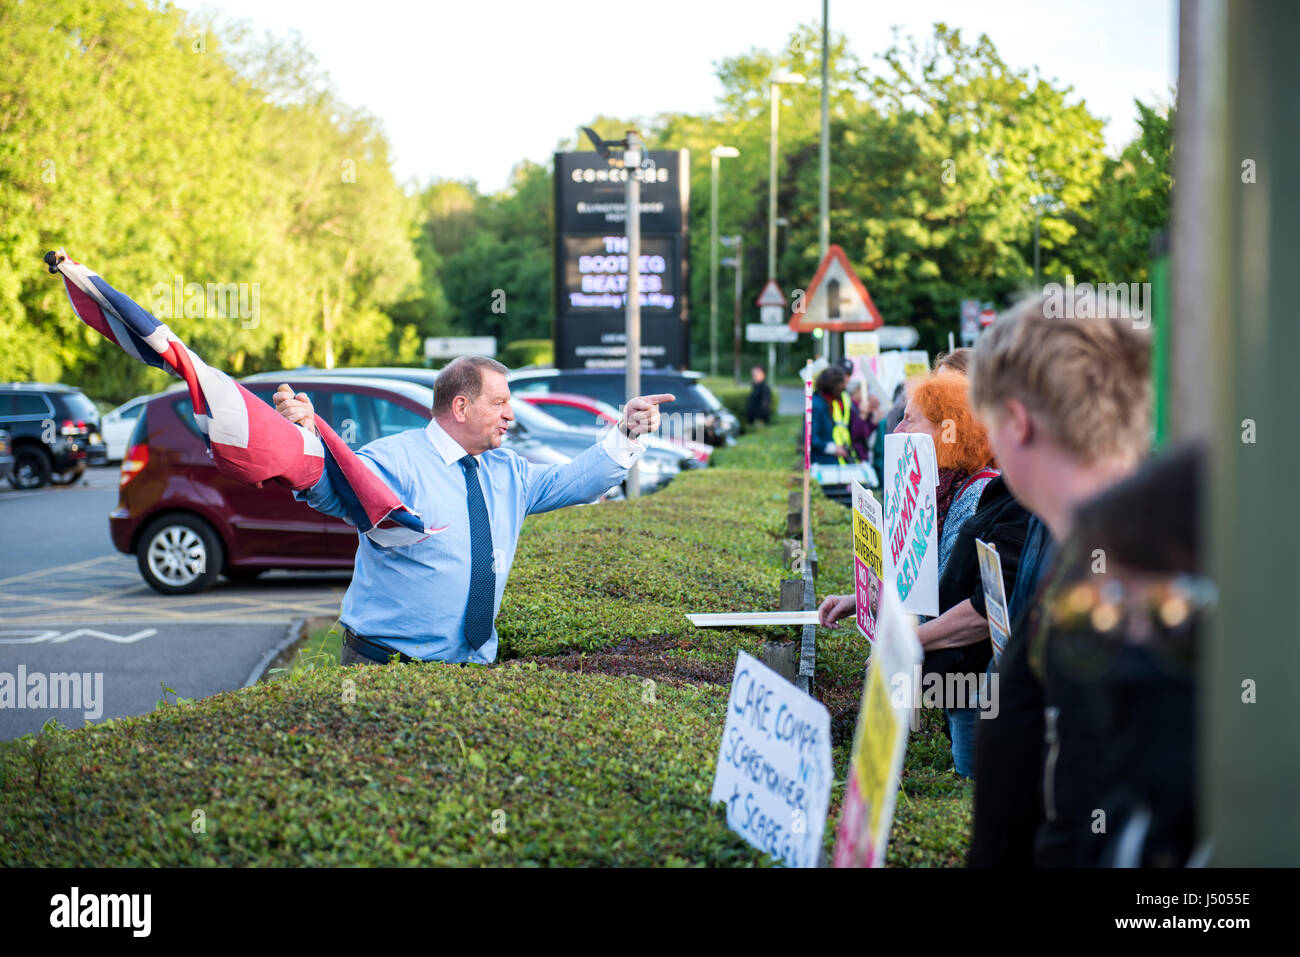 The Concorde Club, Eastleigh, Hampshire, United Kingdom. 14th May, 2017. Southampton Stand Up to Racism activists and supporters protest at the Concorde Club where UK politician and former UKIP leader, Nigel Farage holds an evening questions and answers event about his life. Credit: Will Bailey/Alamy Live News Stock Photo